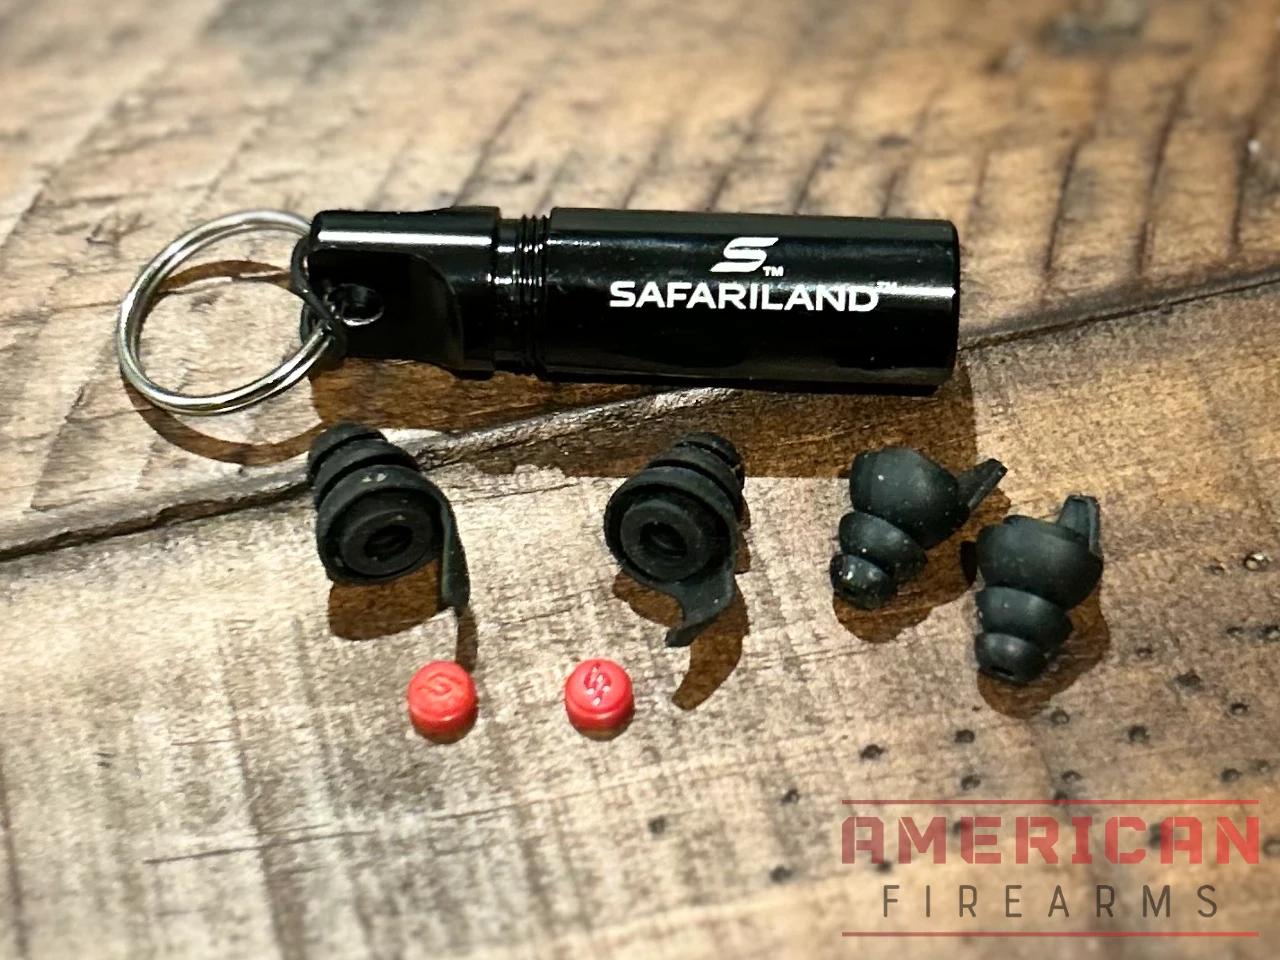 The Safariland Pro Impulse and its case, tips, and filters removed from the tips.